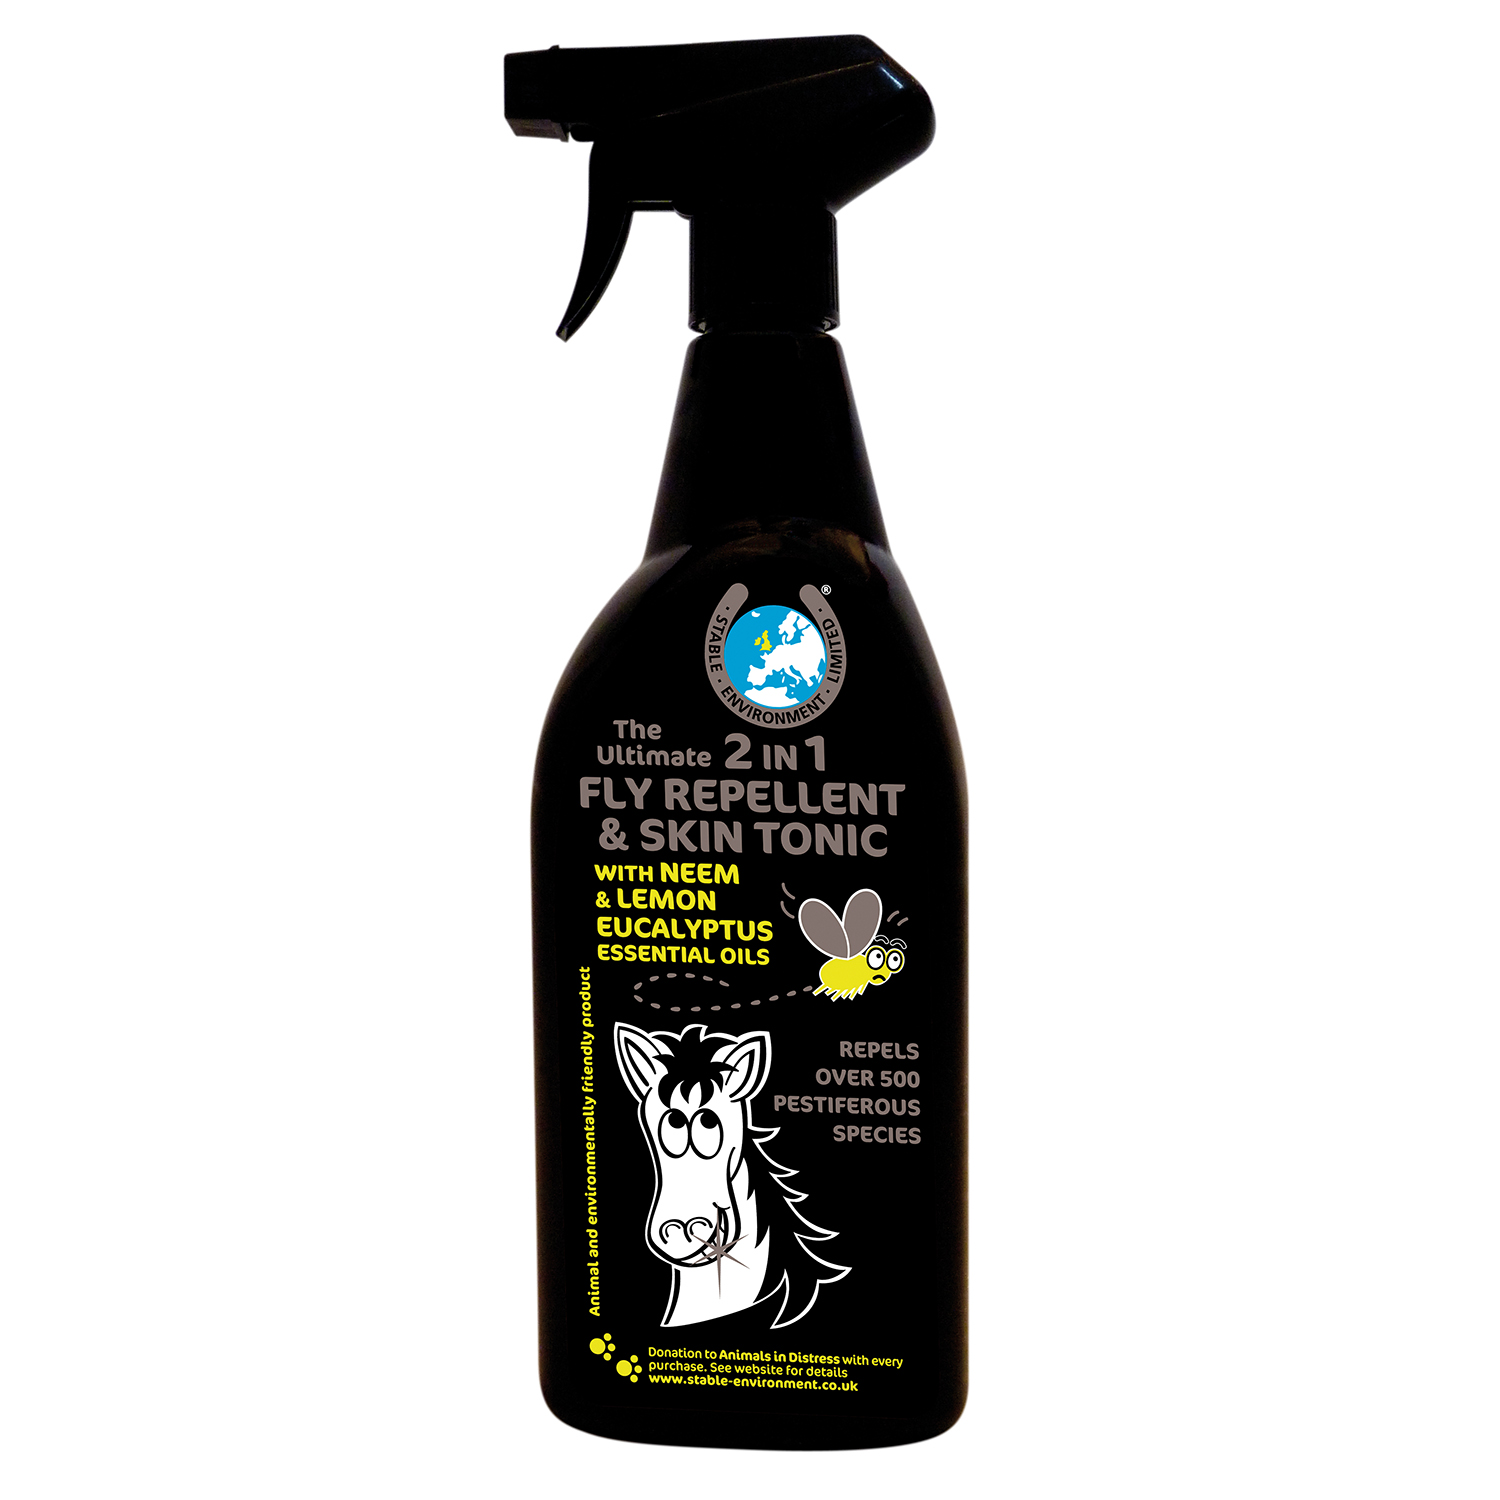 THE ULTIMATE 2 IN 1 FLY REPELLENT & SKIN TONIC 750 ML